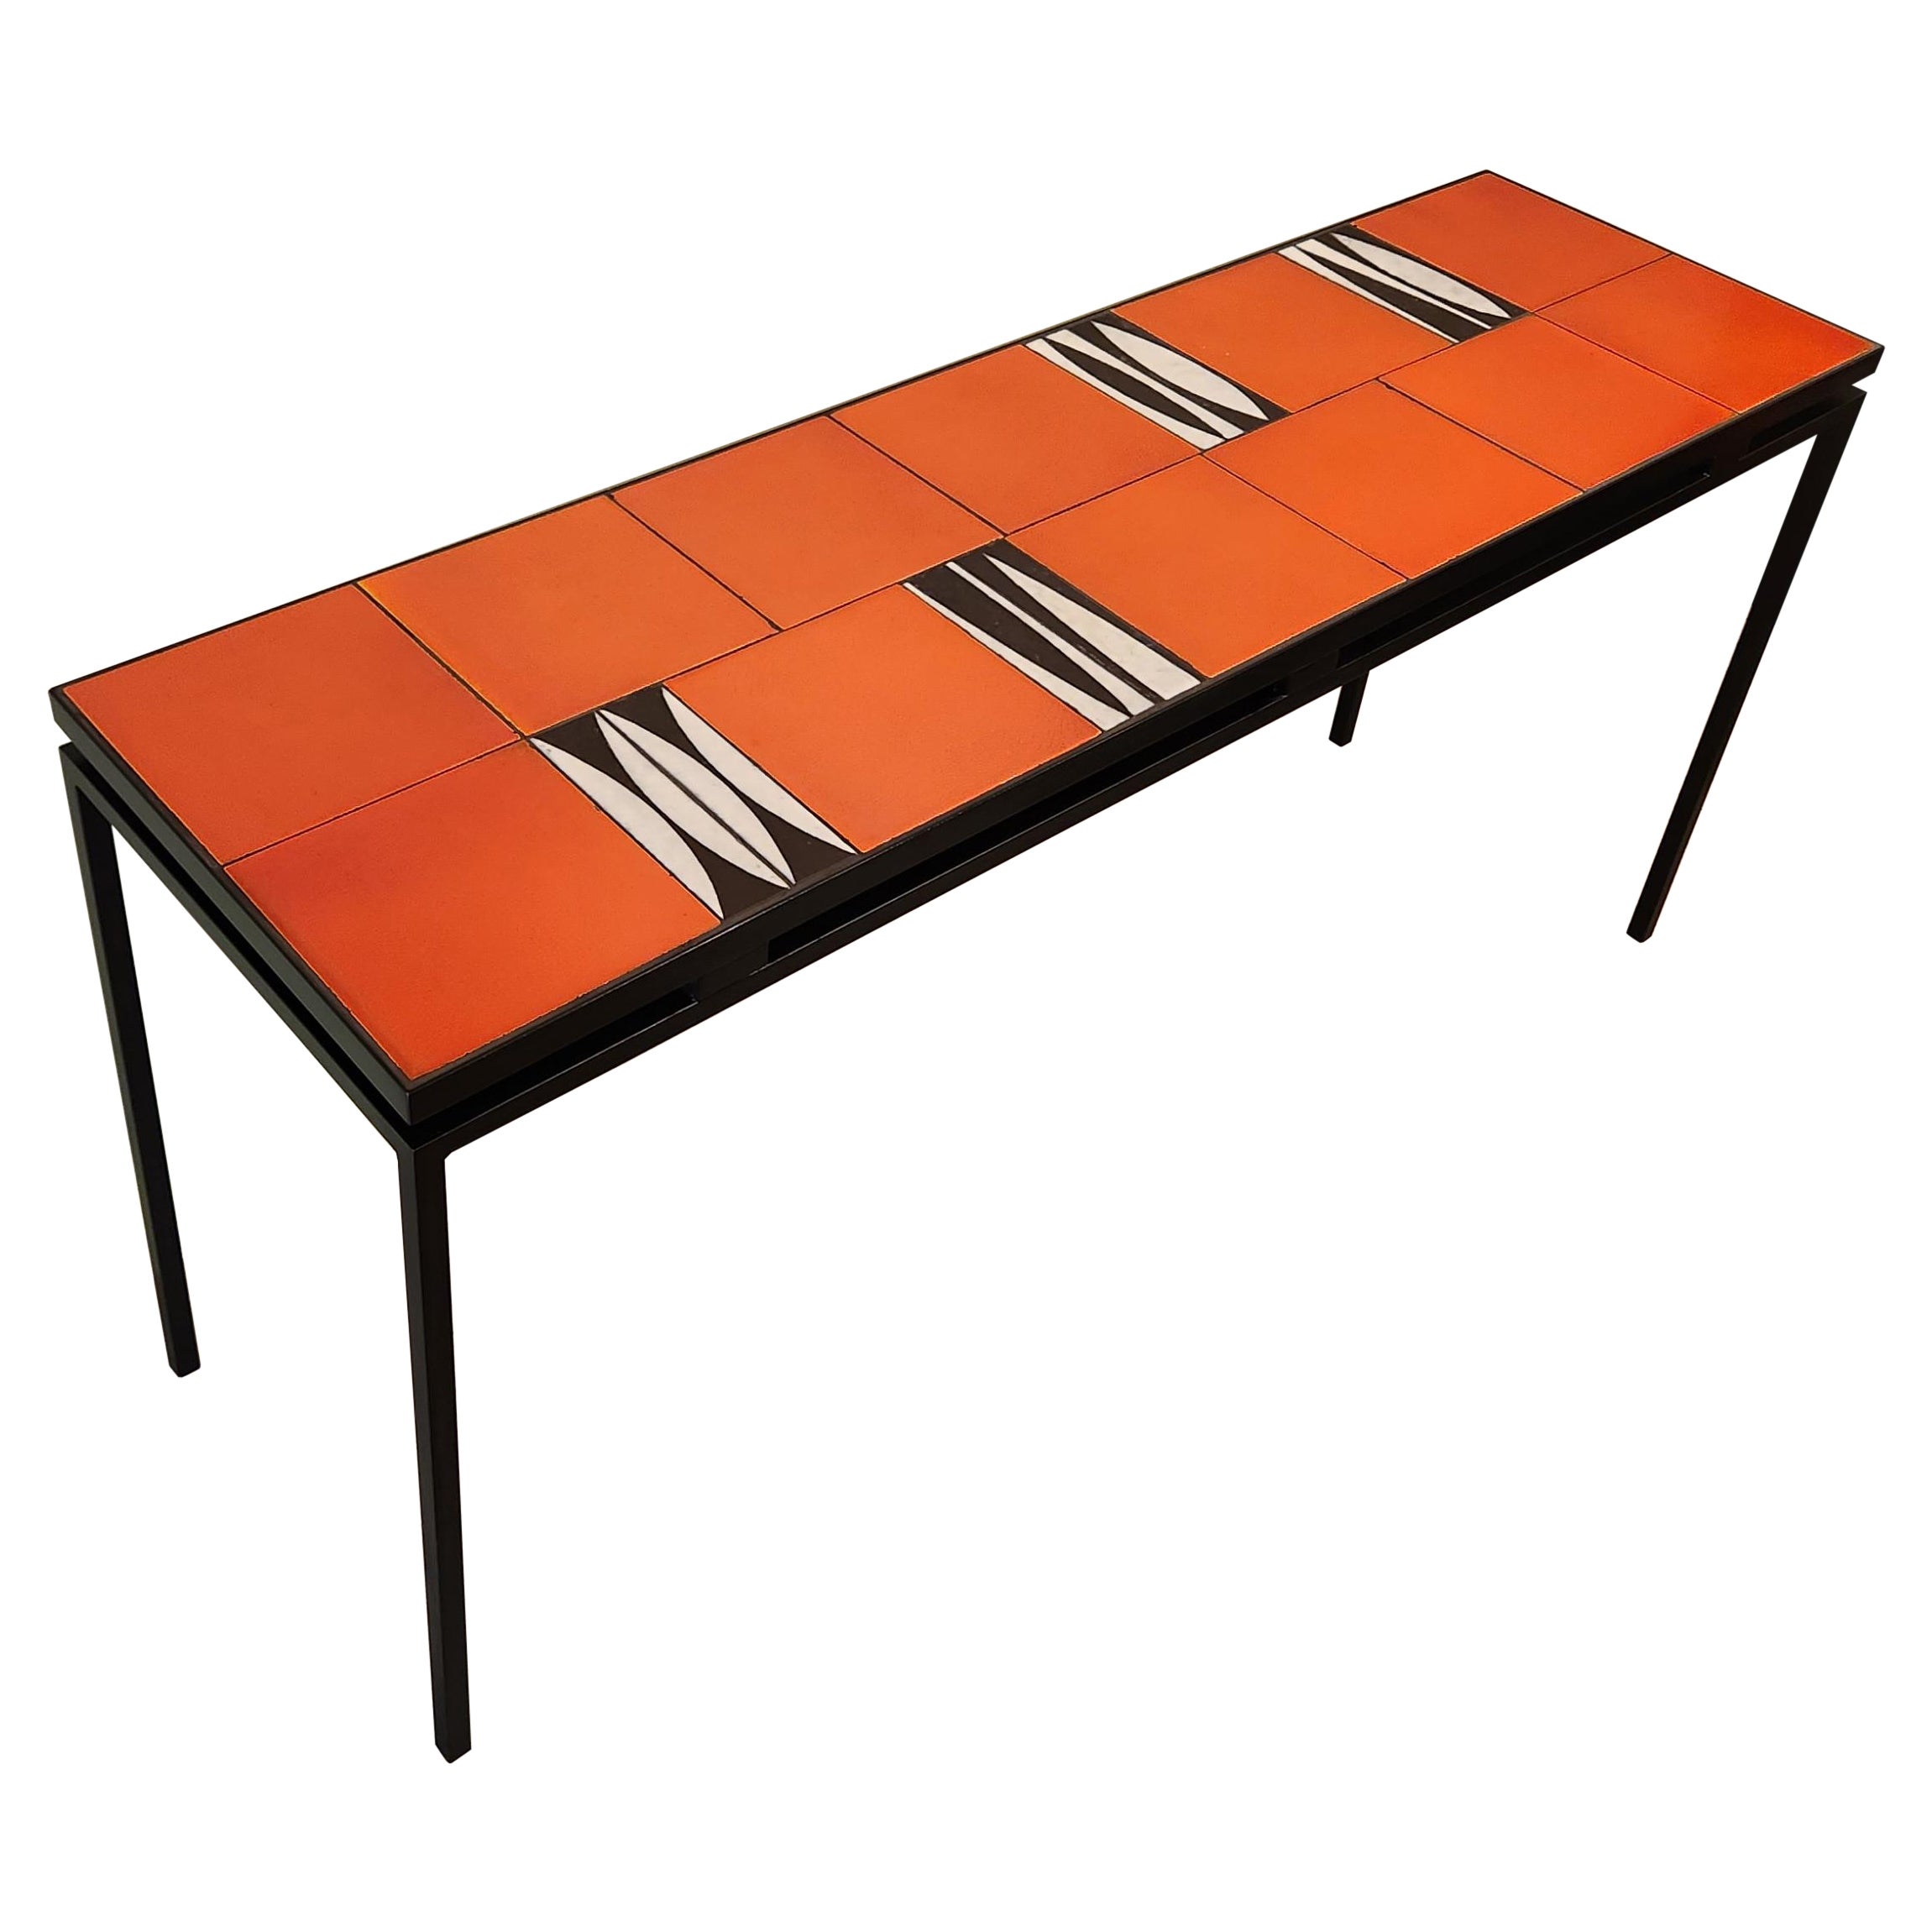 Gueridon Console Table with 12 Red and 8 Navette Roger Capron Ceramic Tiles